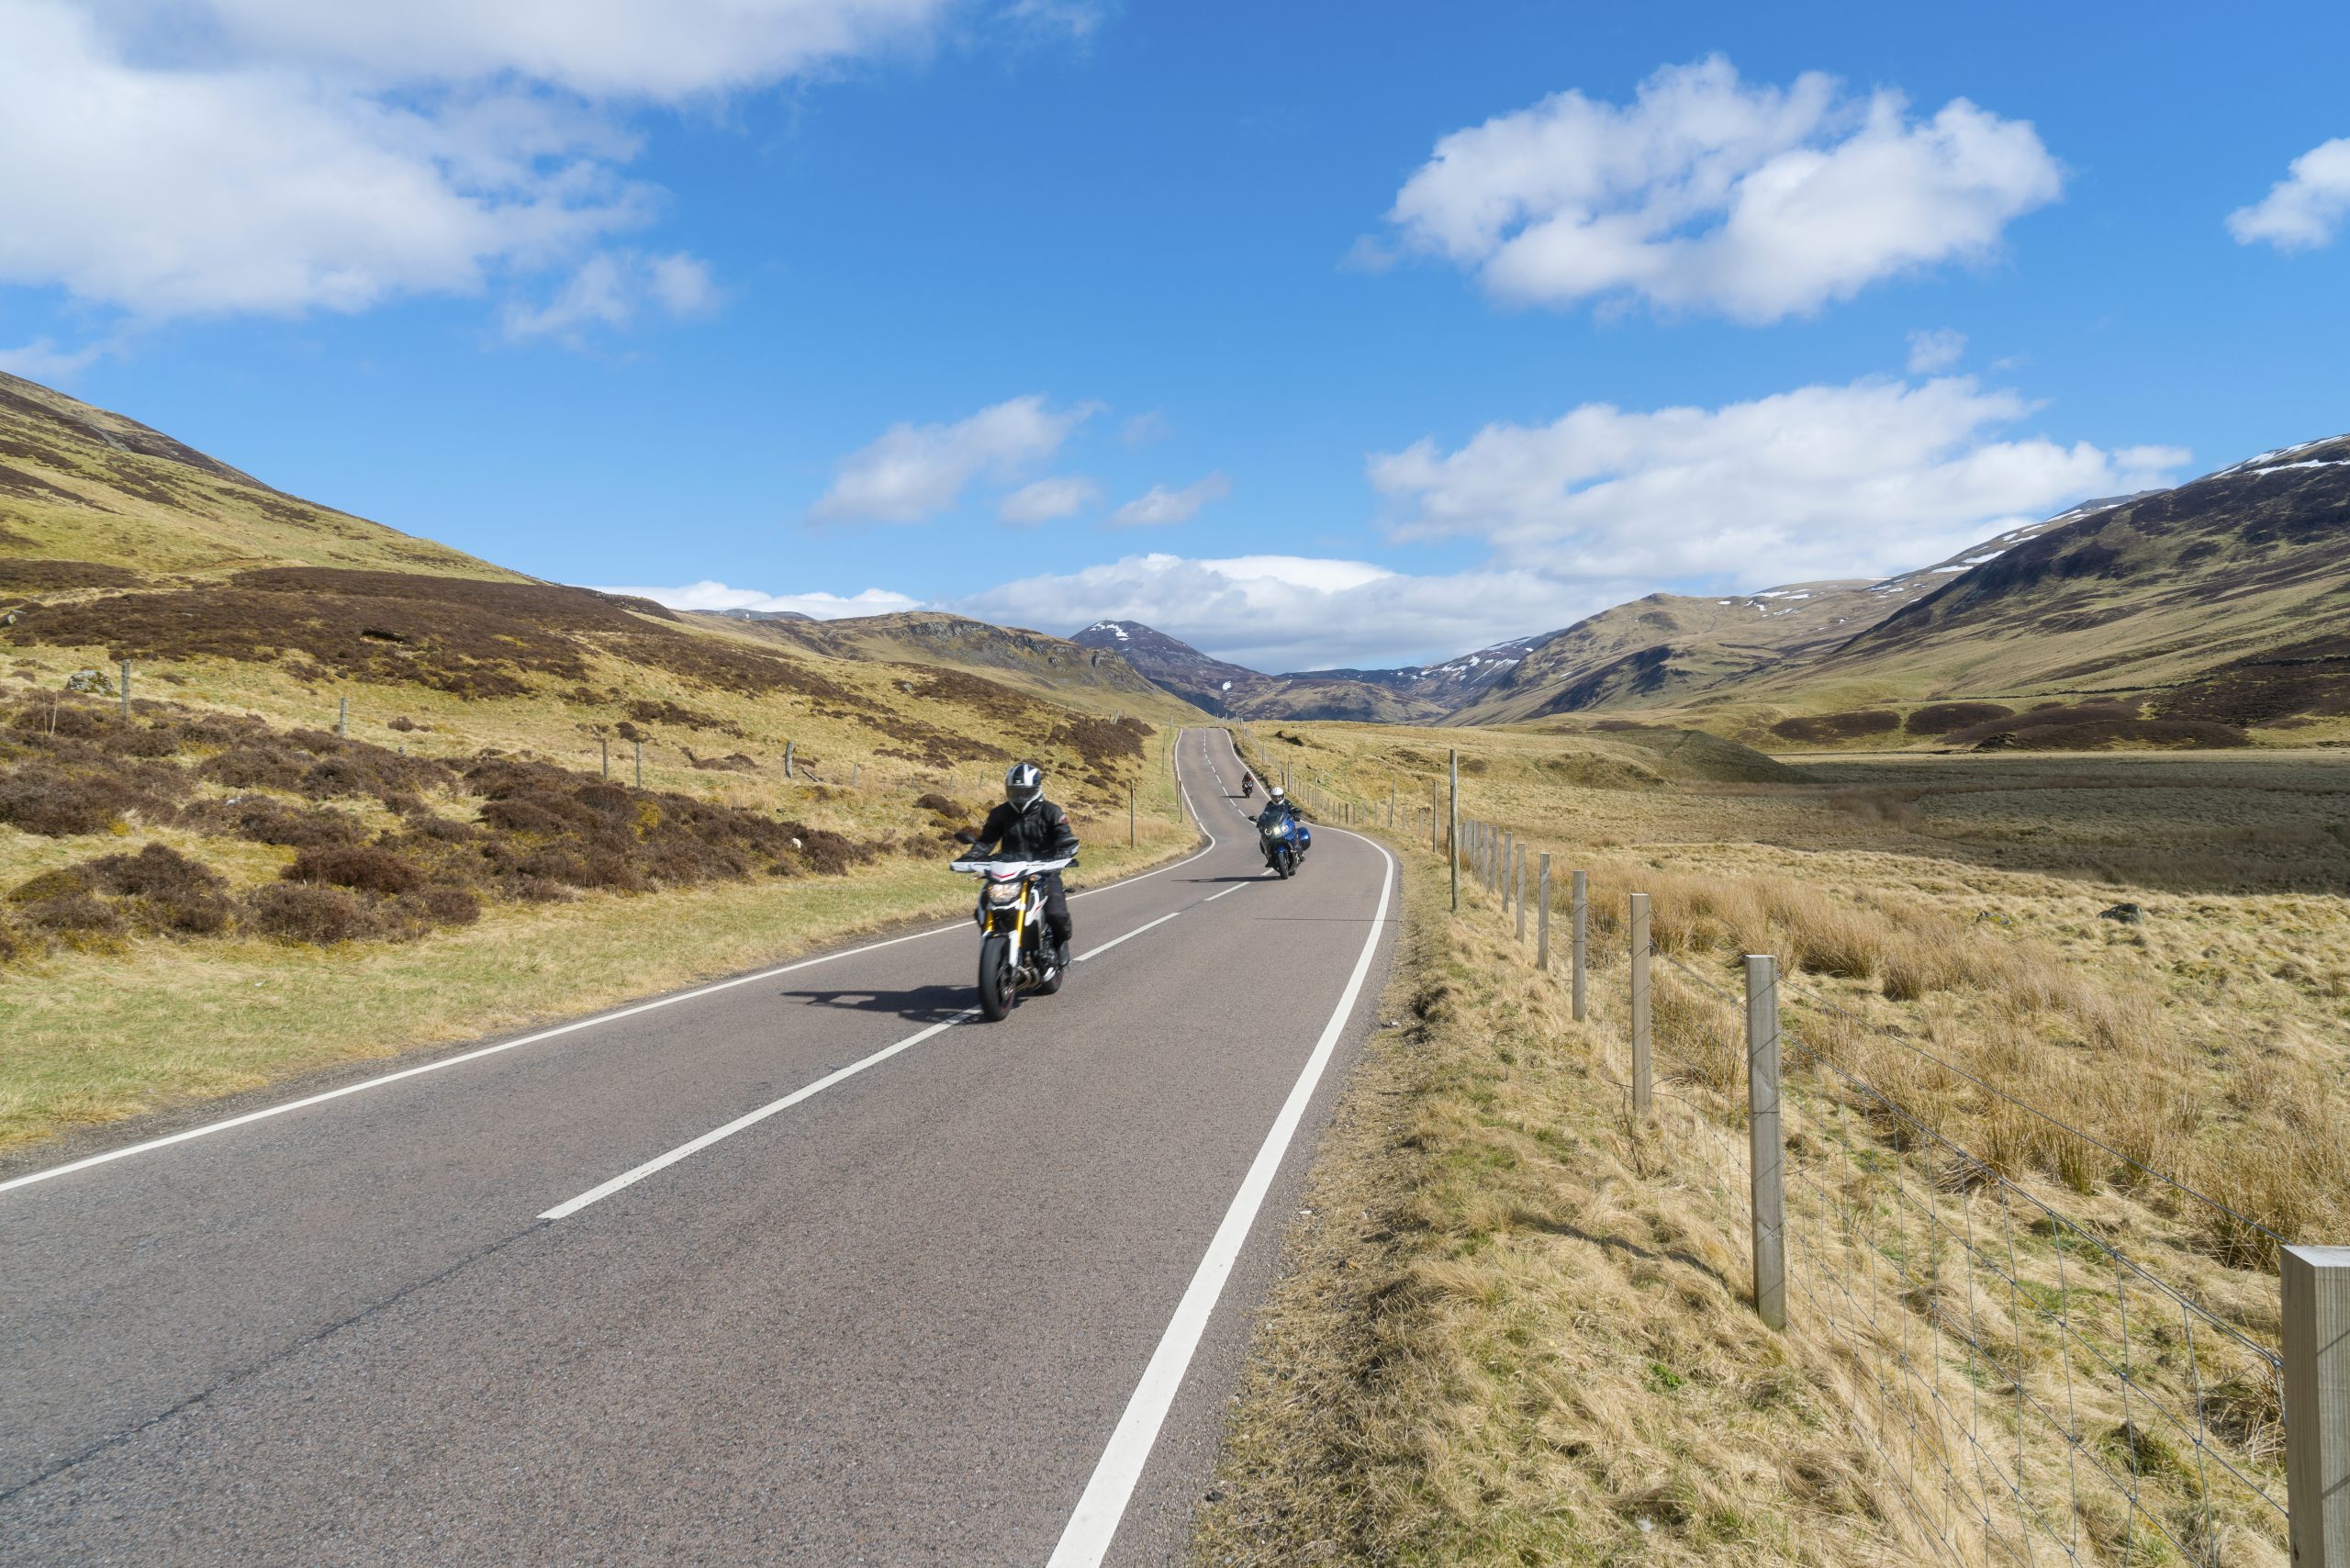 Motorcyclists on the Spittal of Glenshee